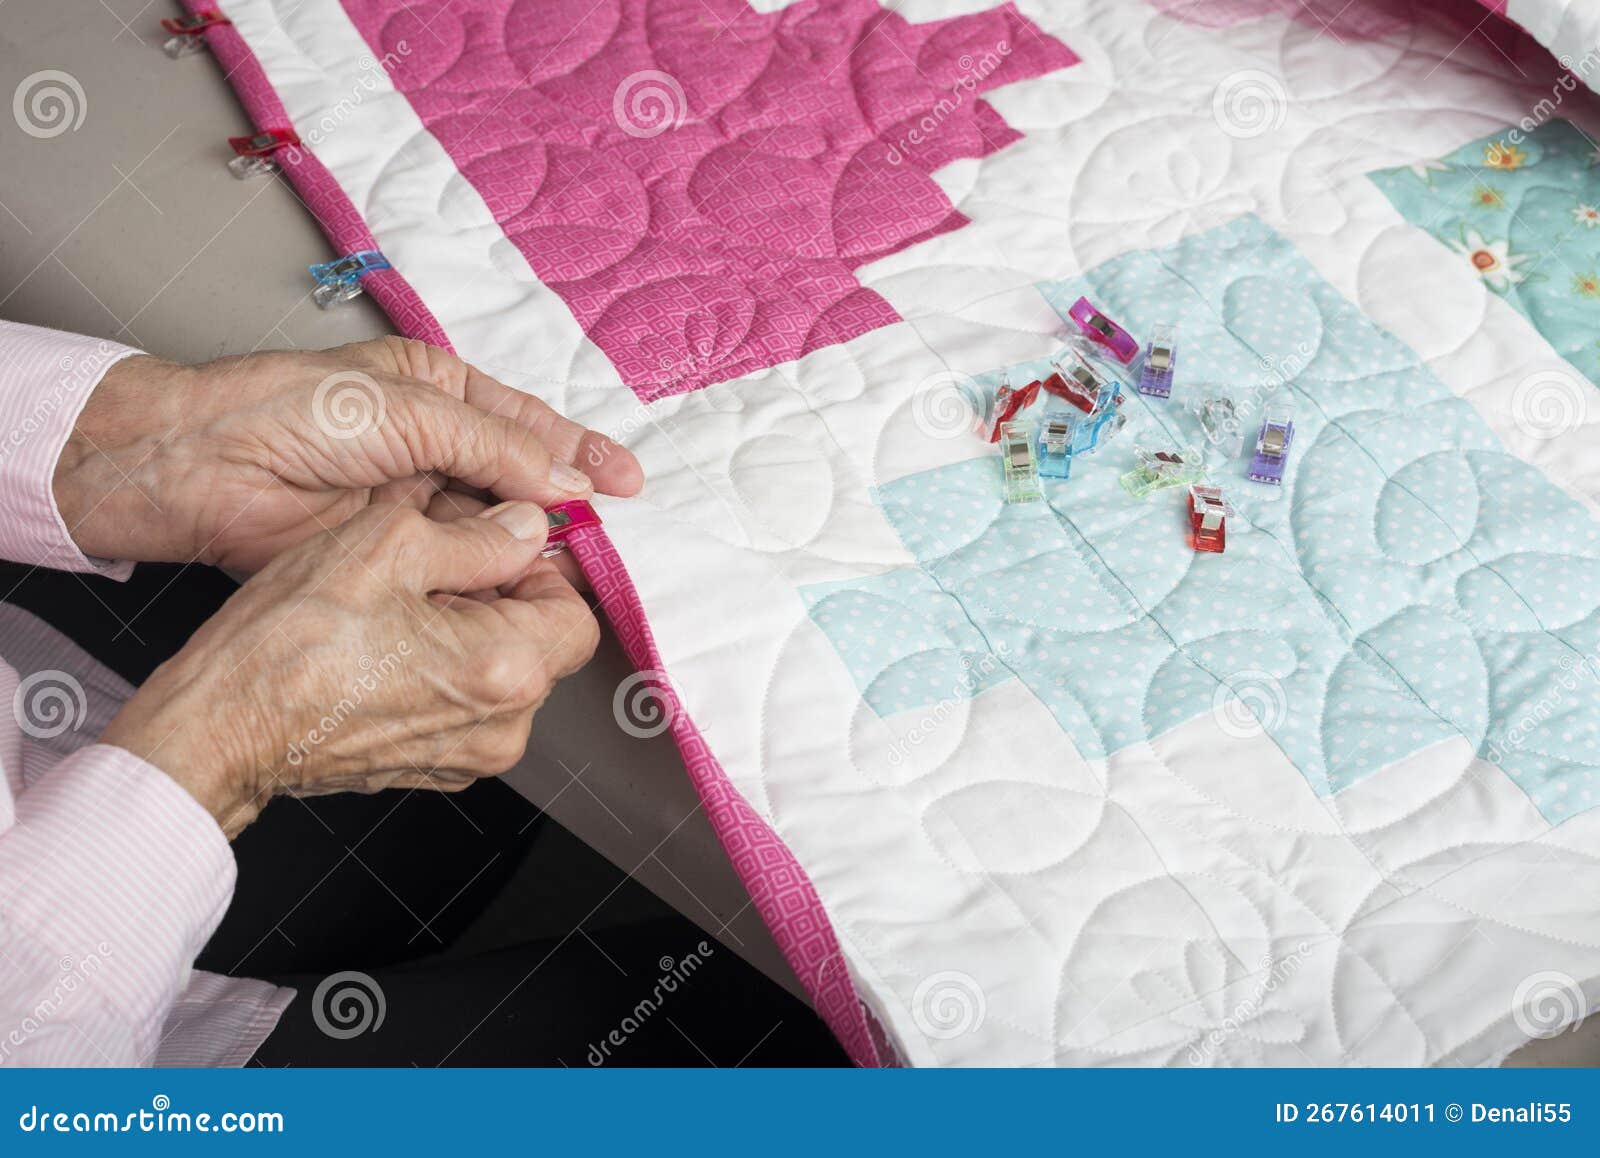 Installing Binding Clips To Quilt Stock Image - Image of hands, quilter:  267614011